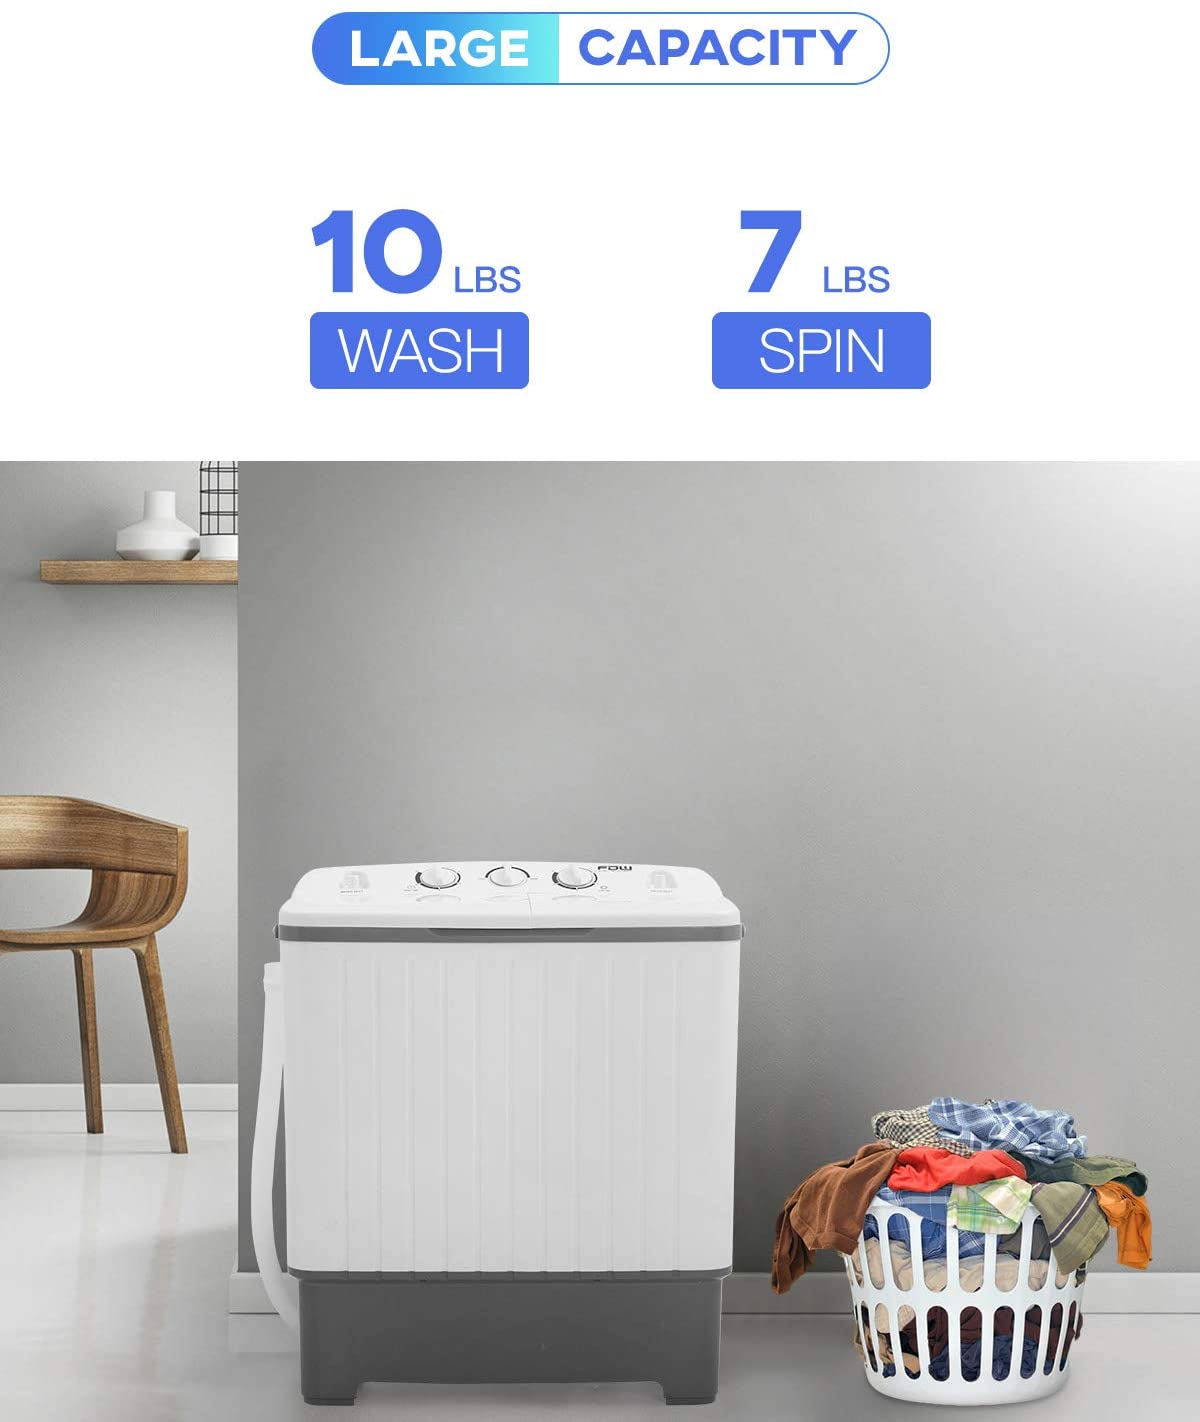 FDW Portable Washing Machine 17 lbs Mini Compact Twin Tub Washing Machinewash (10lbs) and Spin Combo(7lbs) Laundry Cloths Washer Timer Control for HOM